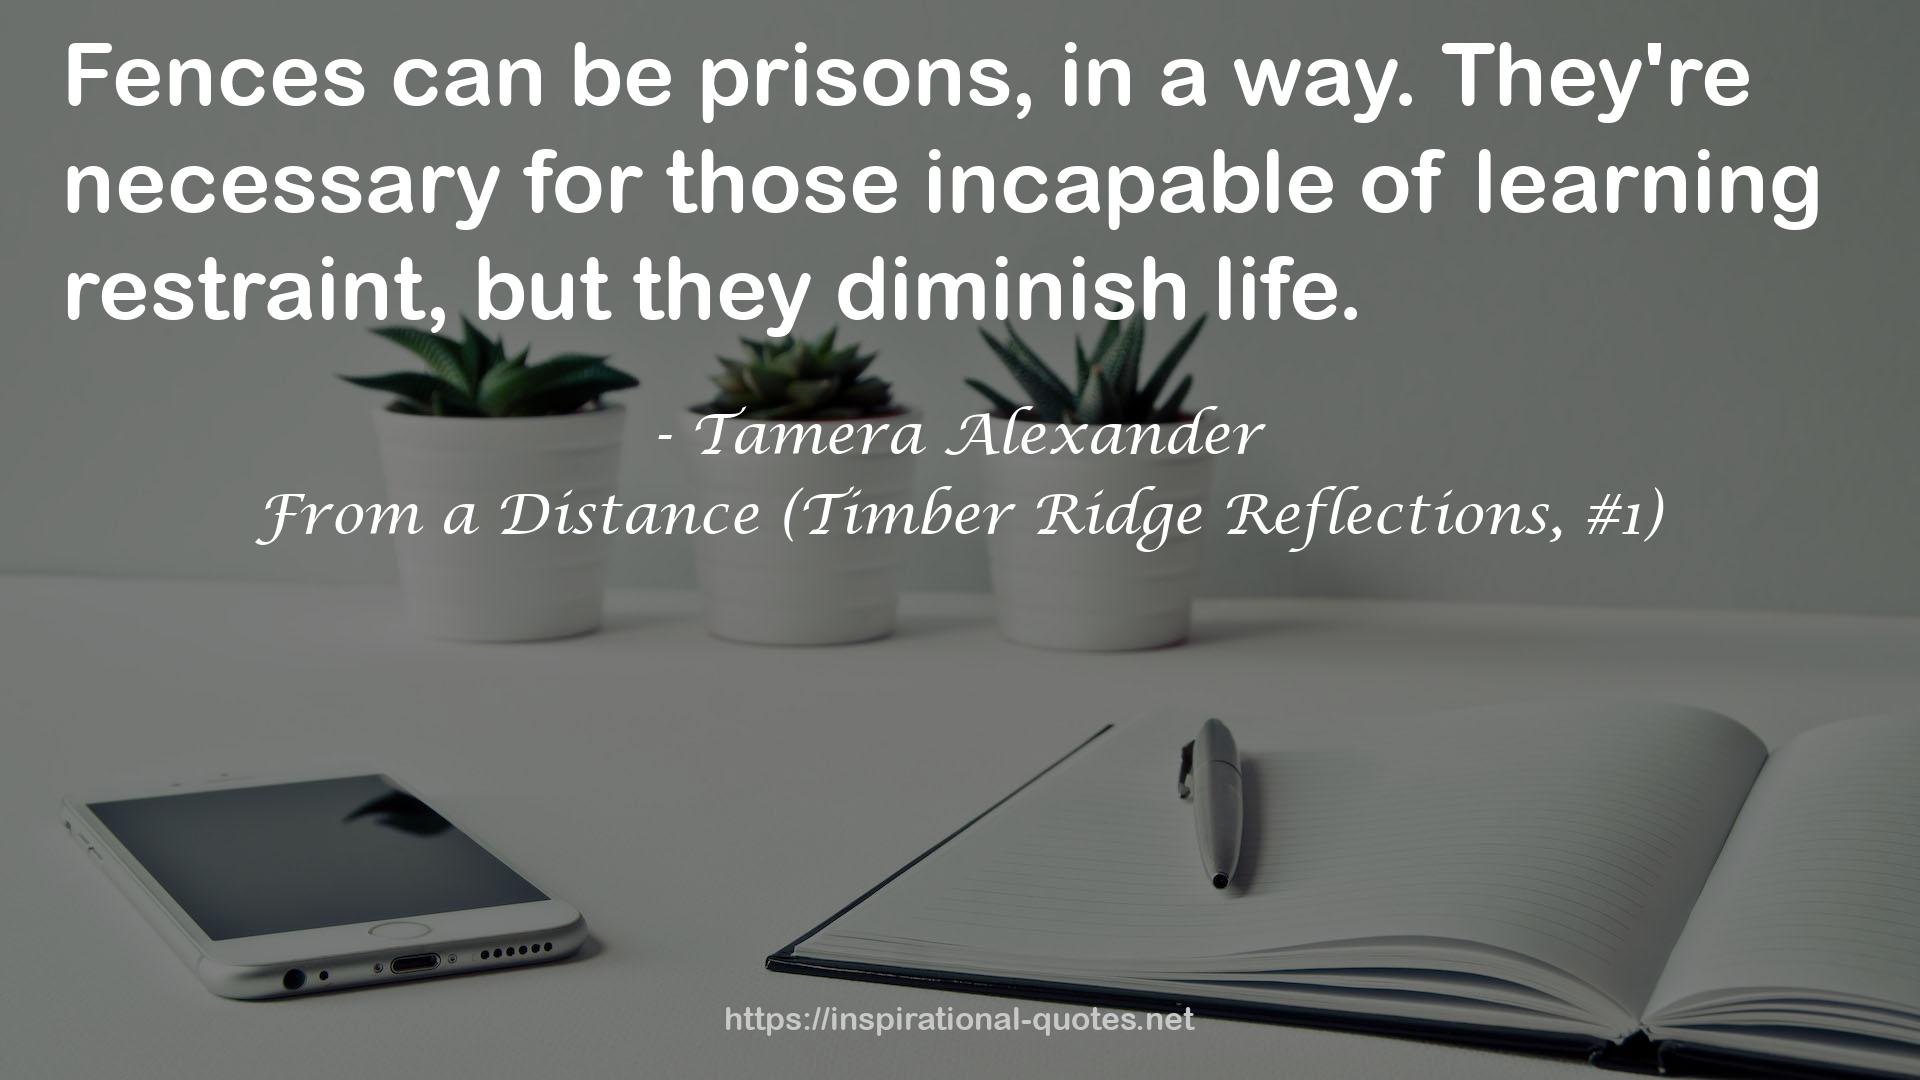 From a Distance (Timber Ridge Reflections, #1) QUOTES